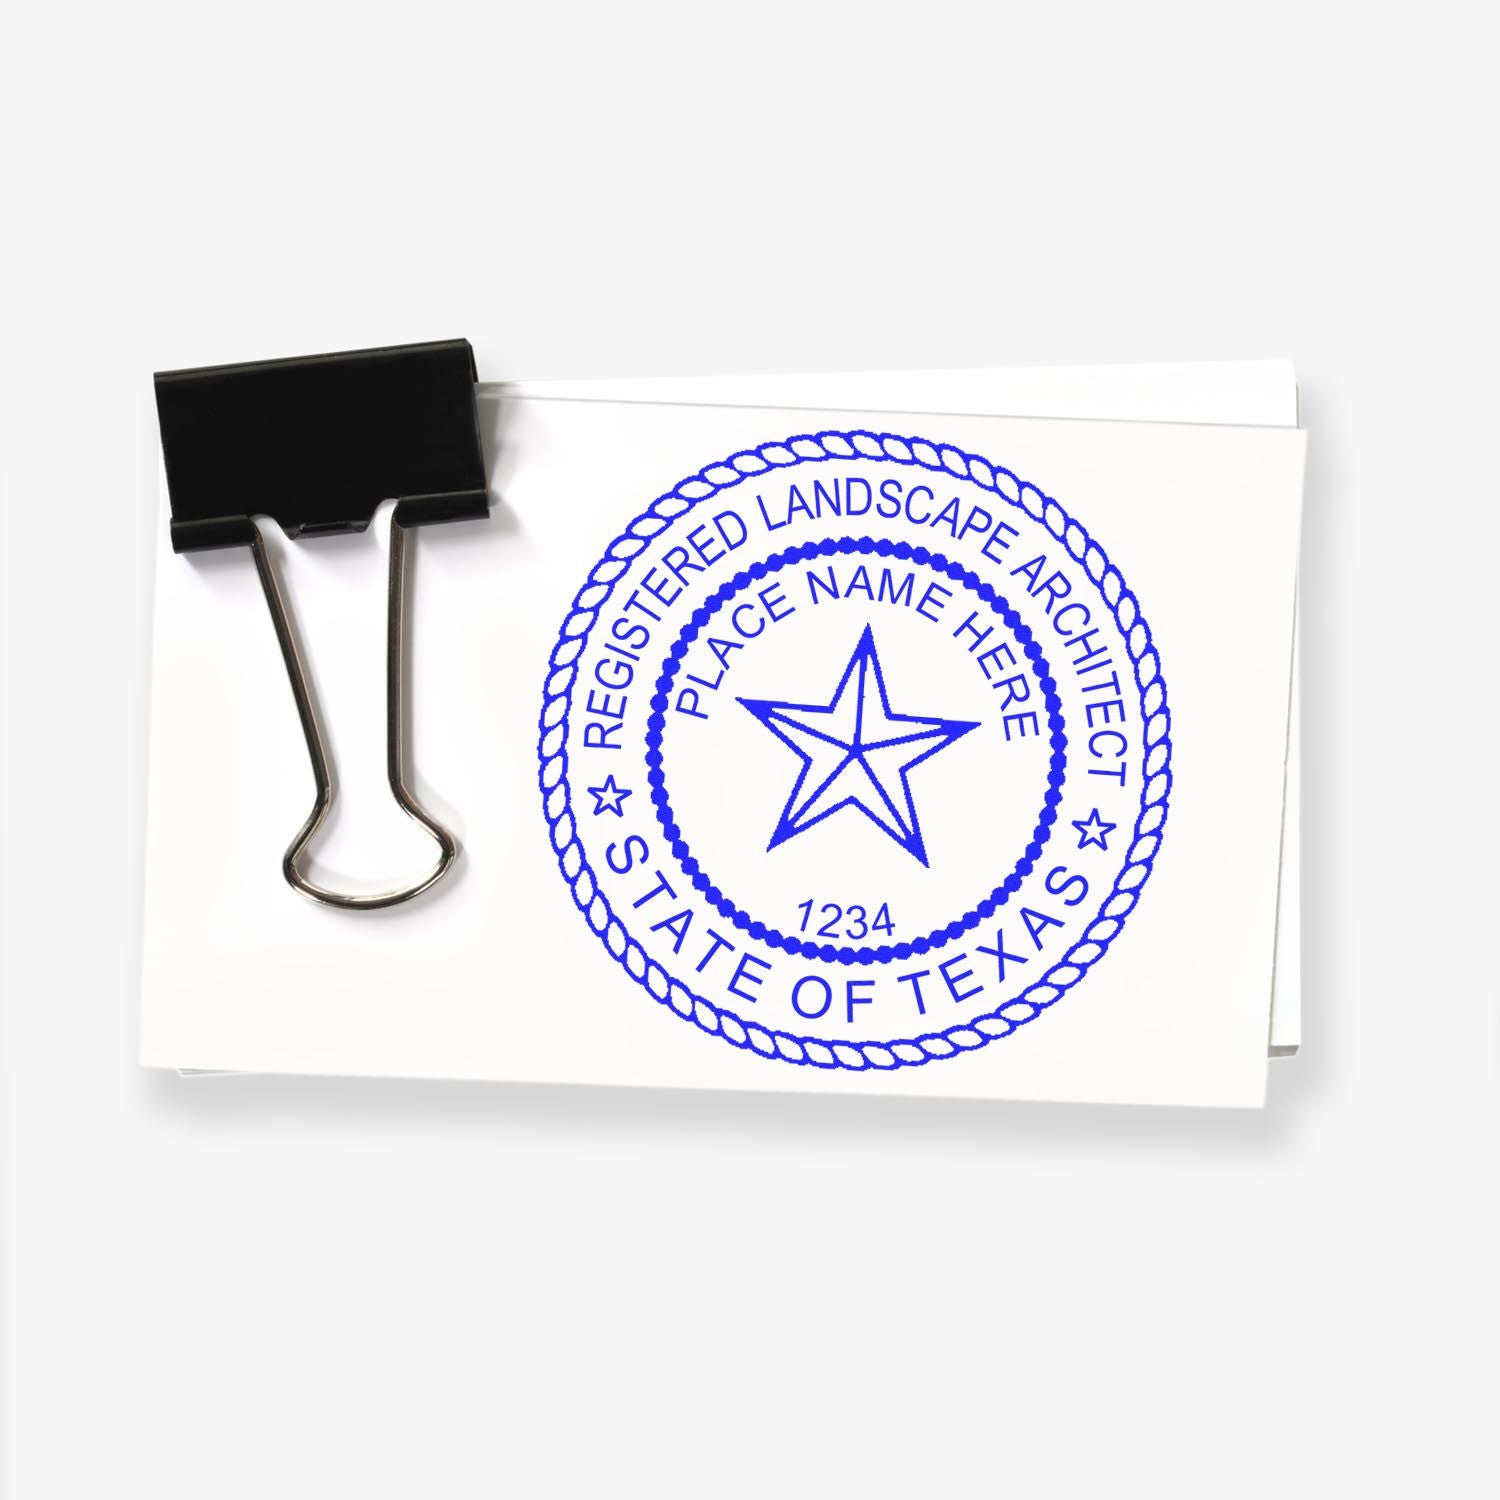 The main image for the Premium MaxLight Pre-Inked Texas Landscape Architectural Stamp depicting a sample of the imprint and electronic files